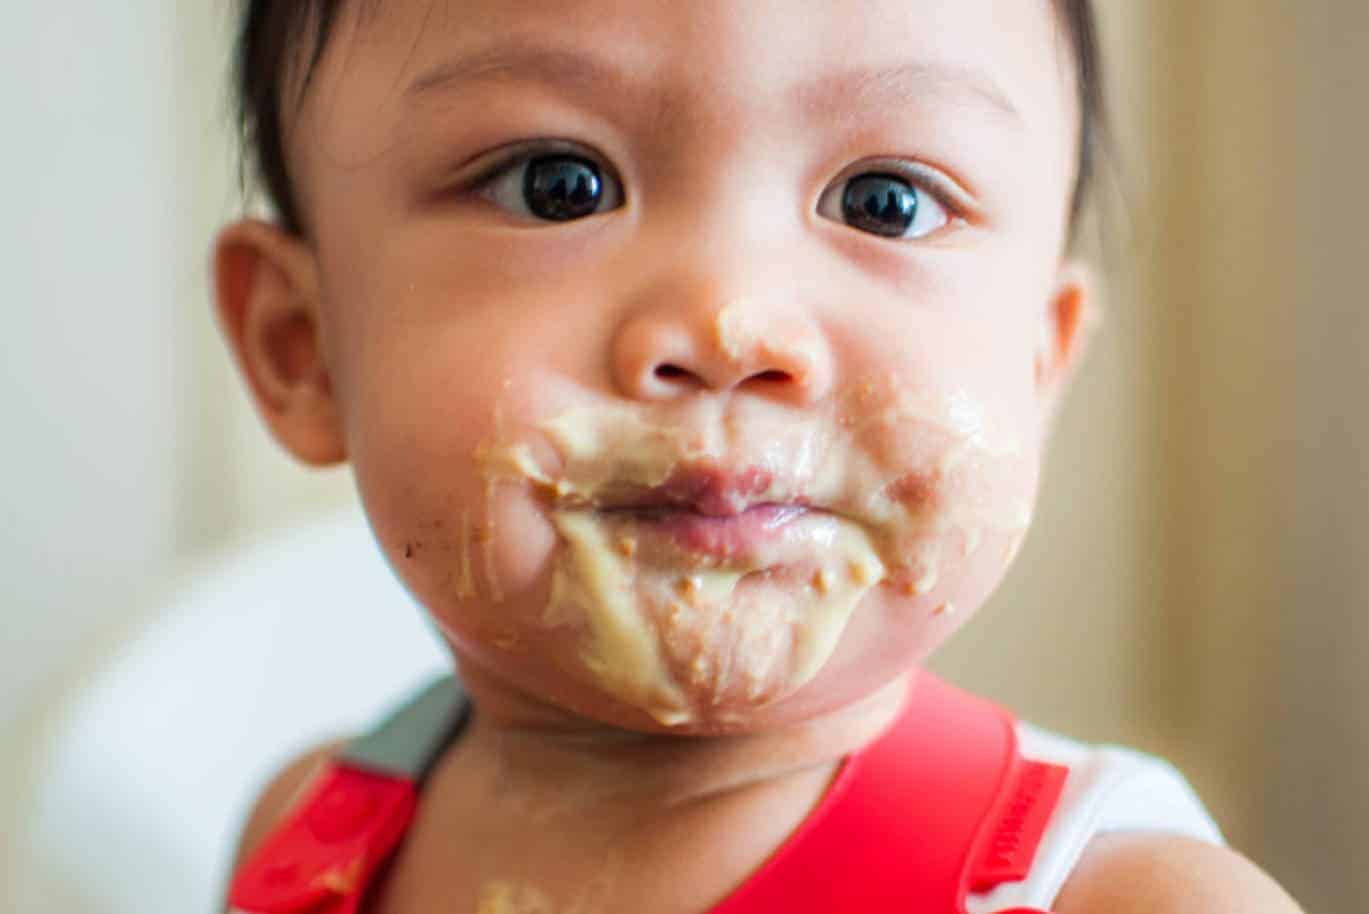 how to get baby food stains out